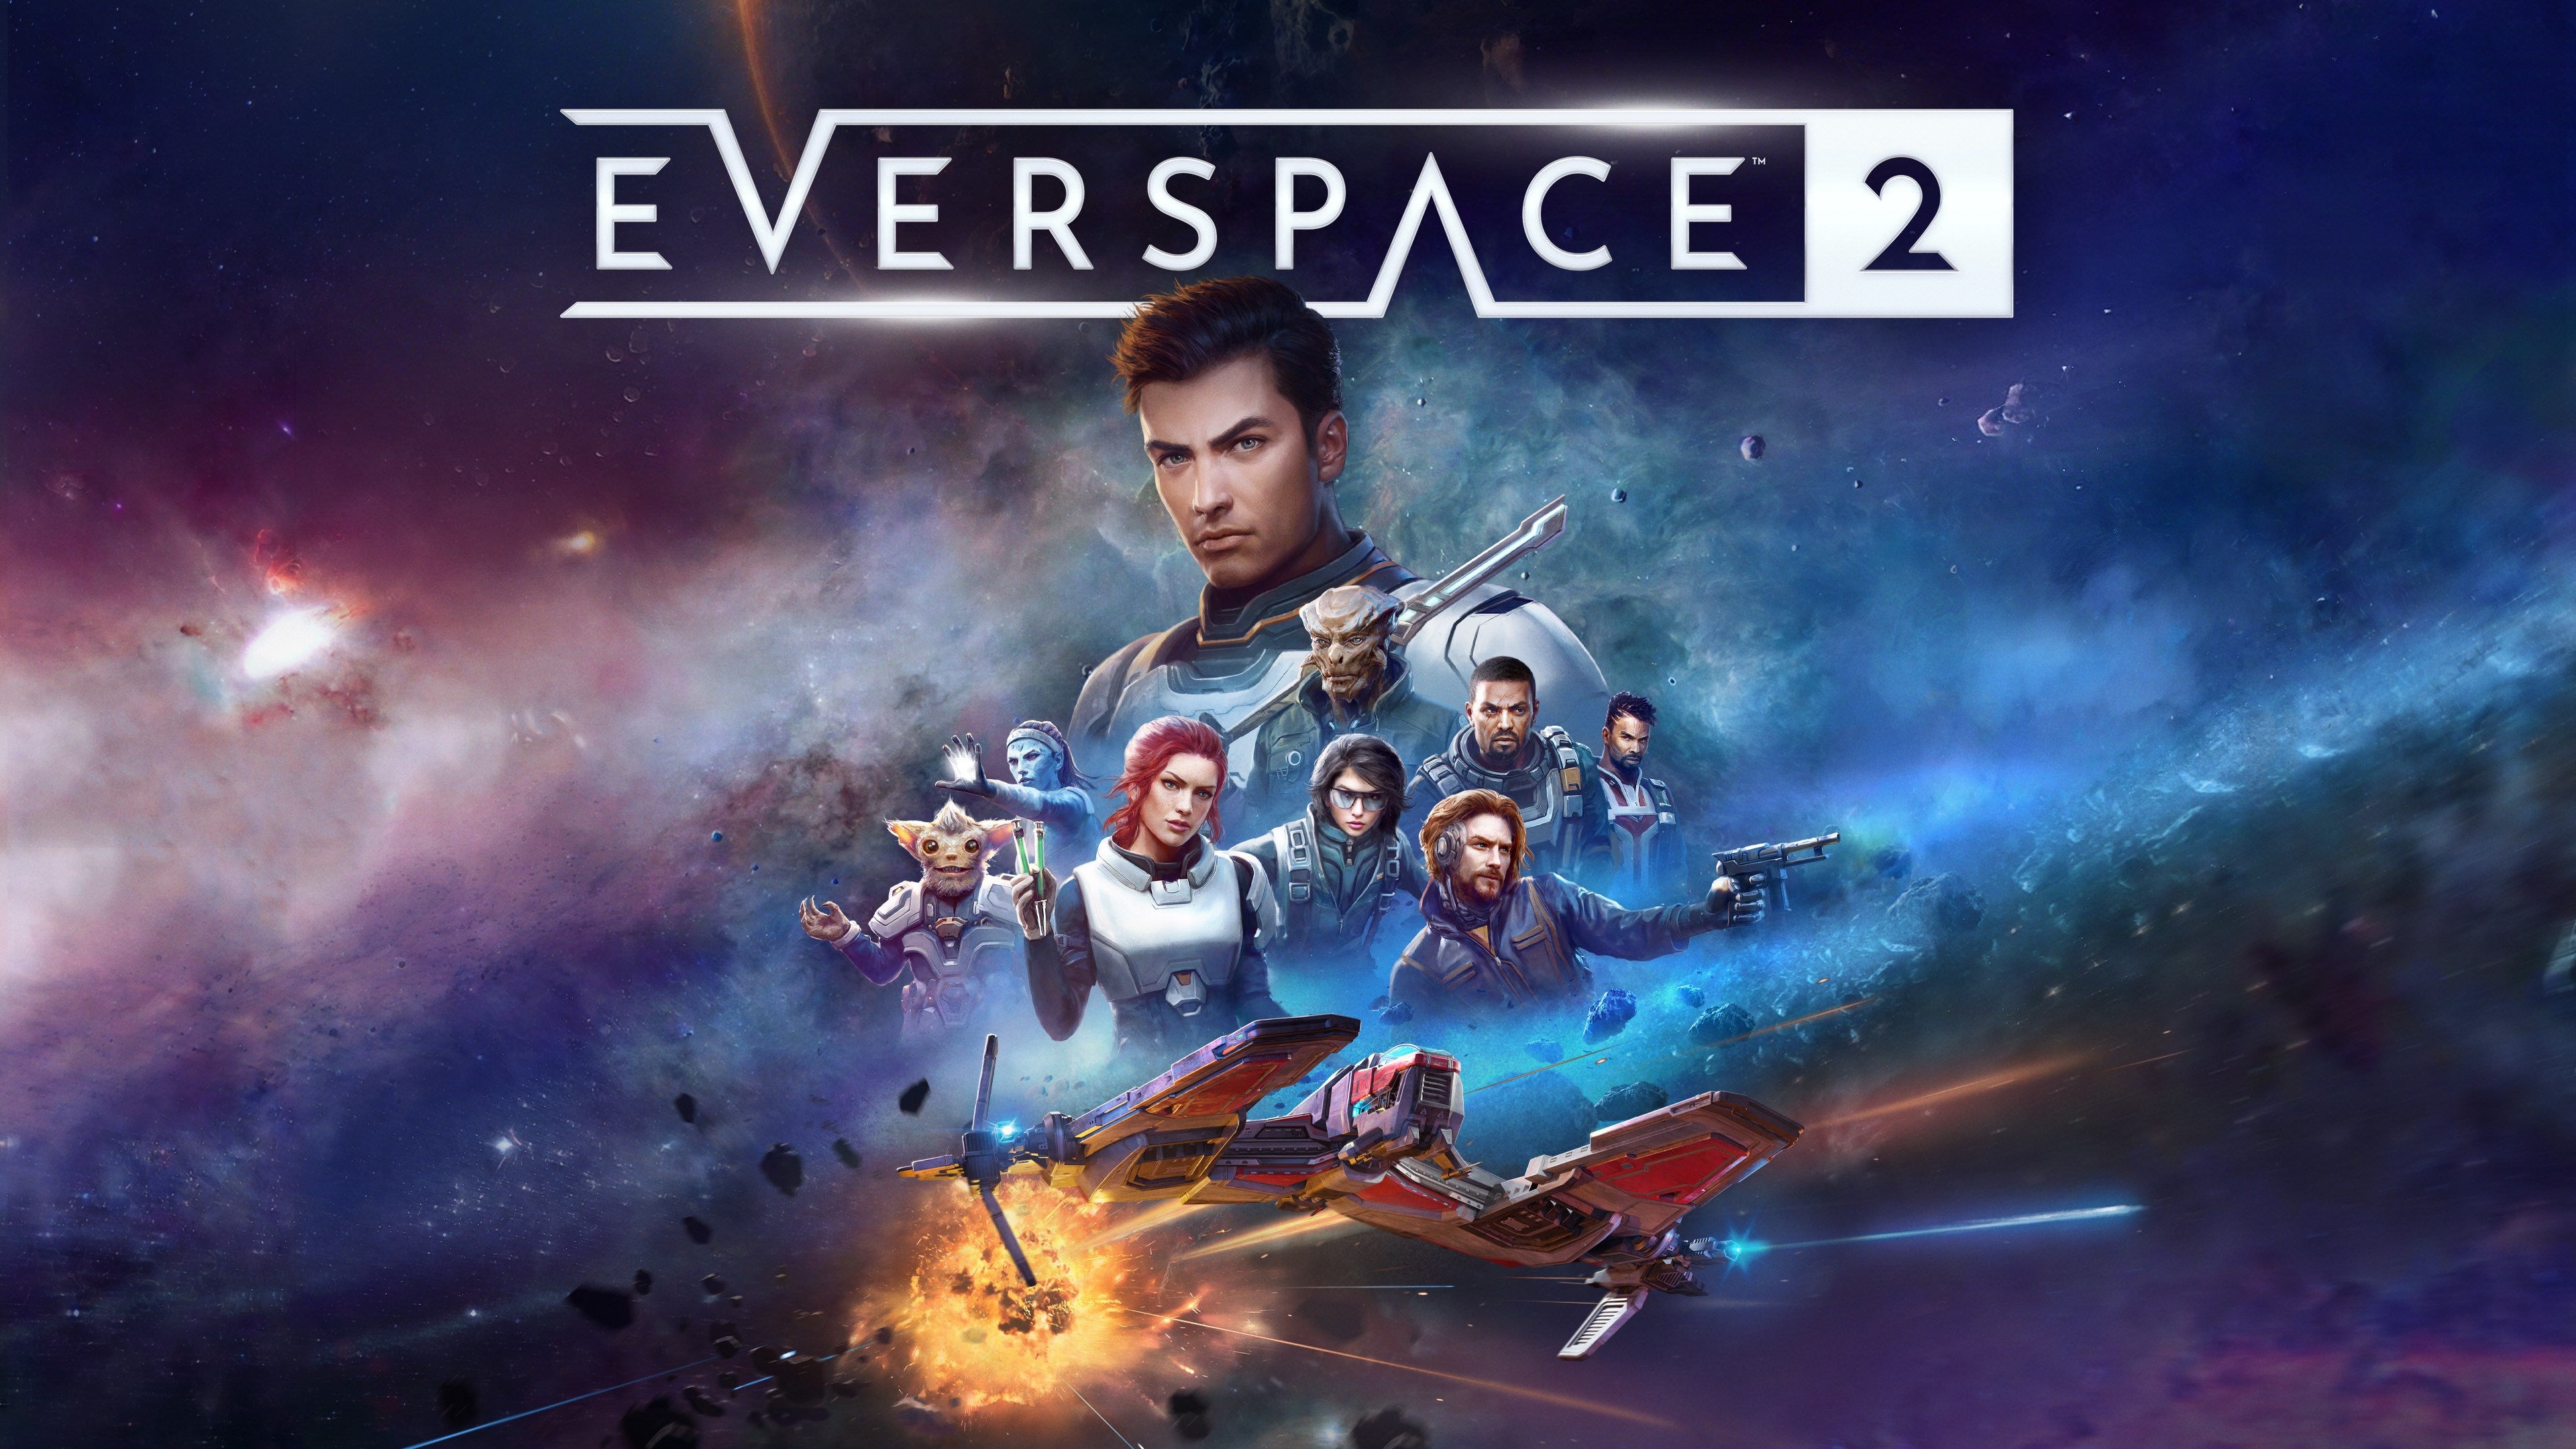 Image for Everspace 2 gets April release date, but won’t launch on Xbox One or PS4